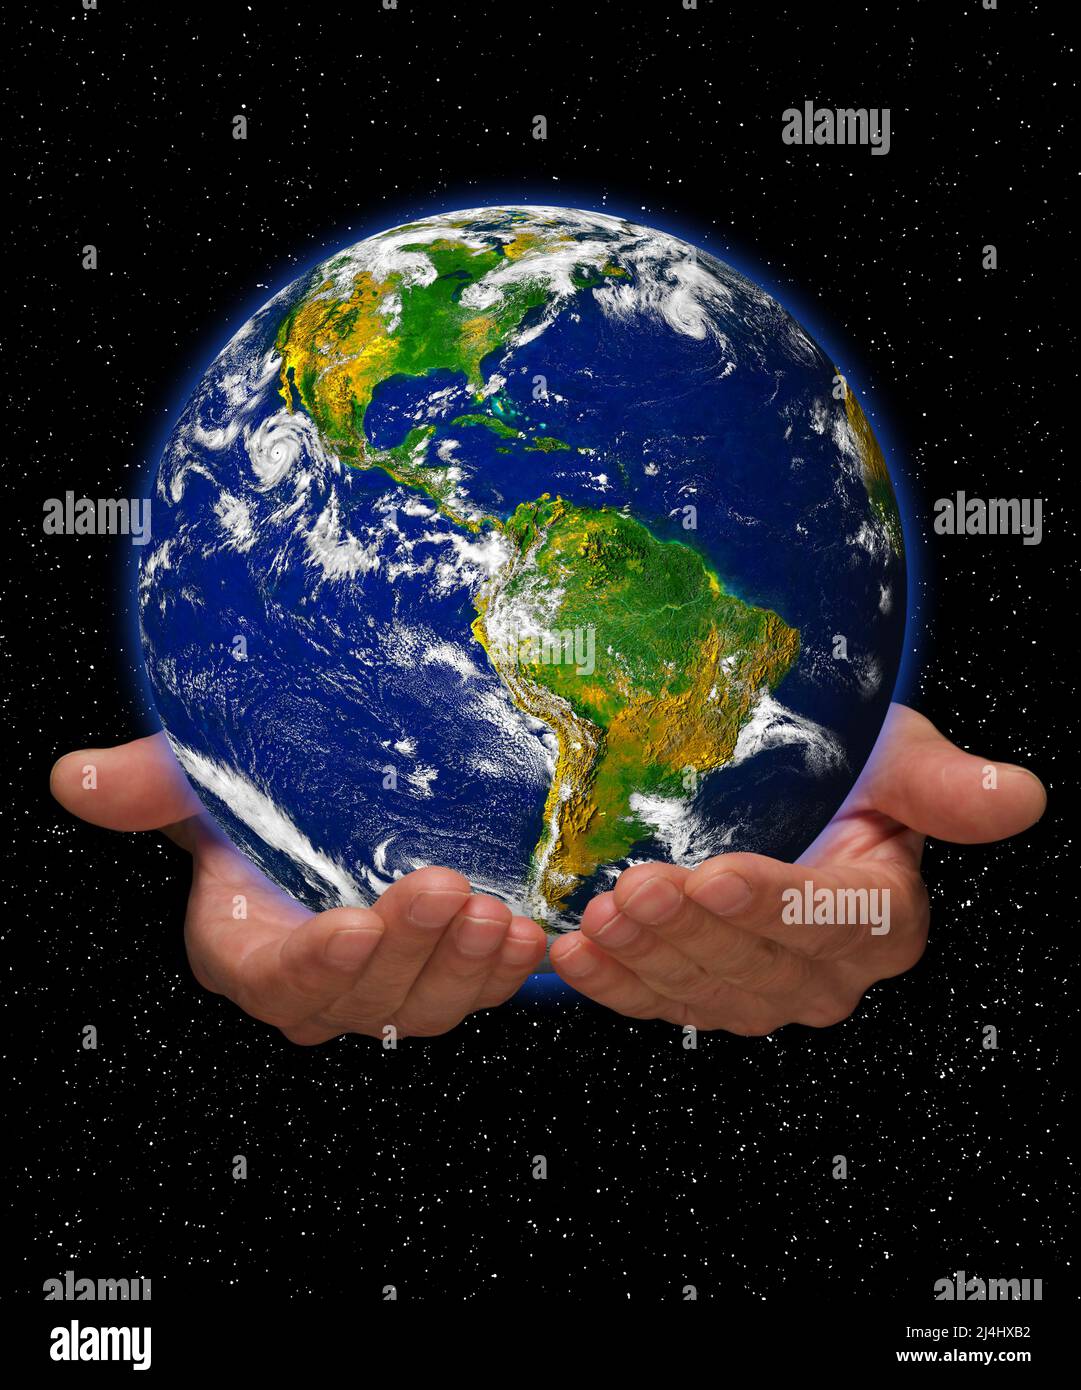 Caring for the planet, conceptual image Stock Photo